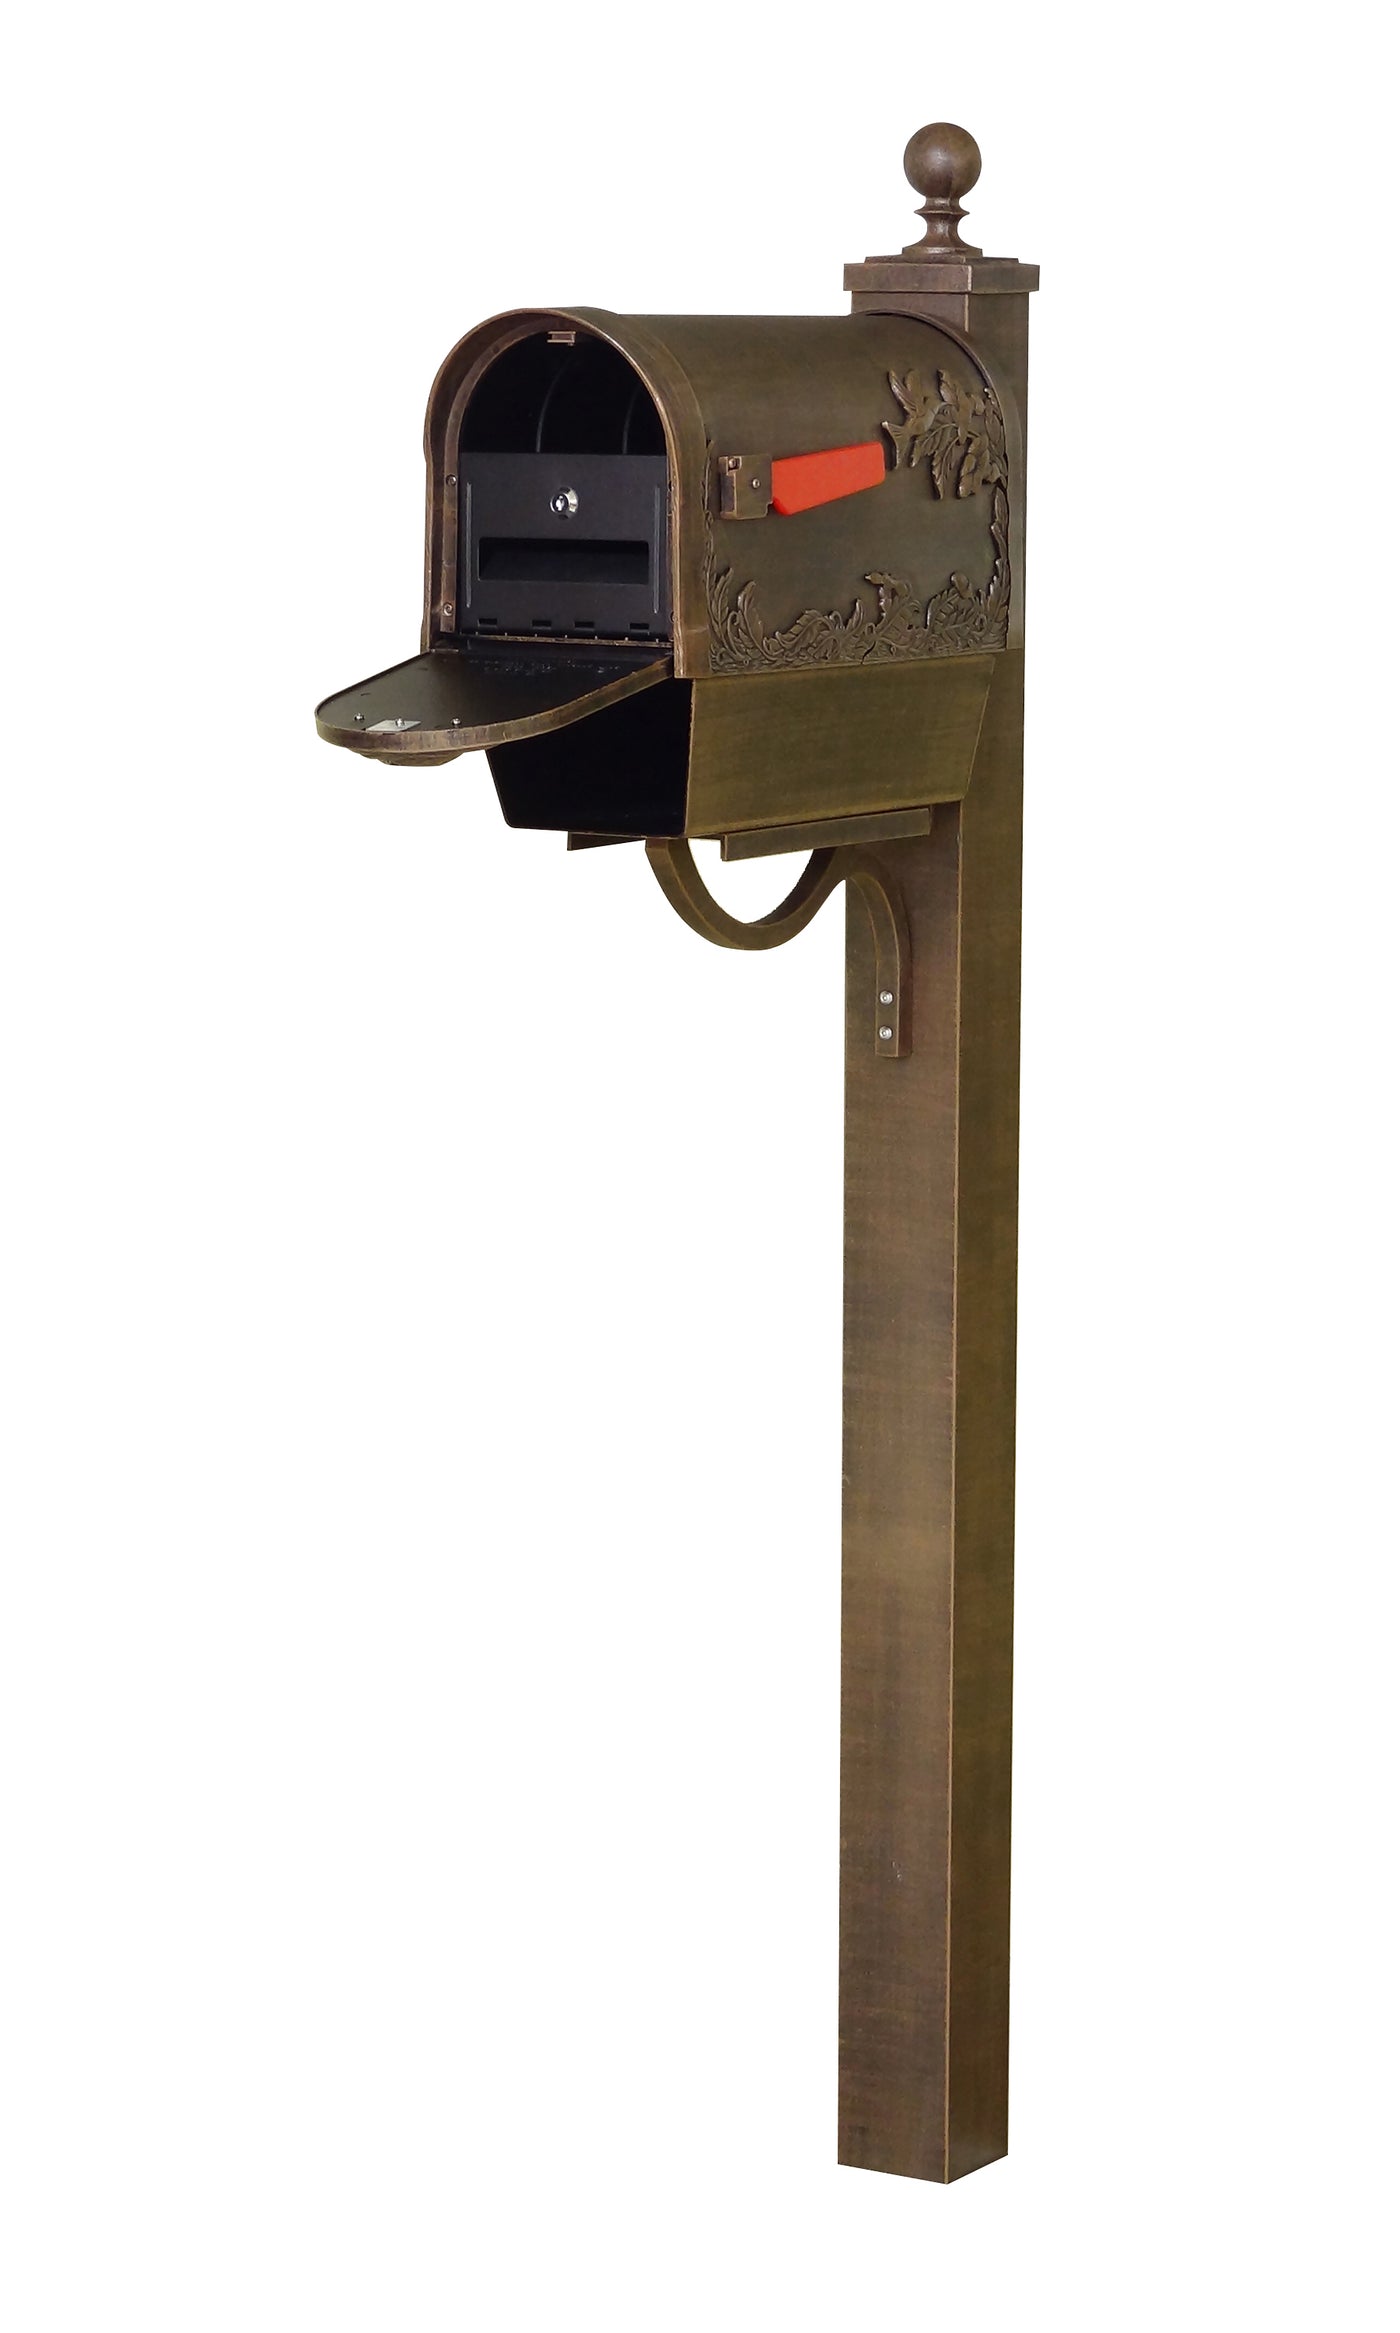 Hummingbird Curbside Mailbox with Locking Insert, Newspaper Tube and Springfield Mailbox Post